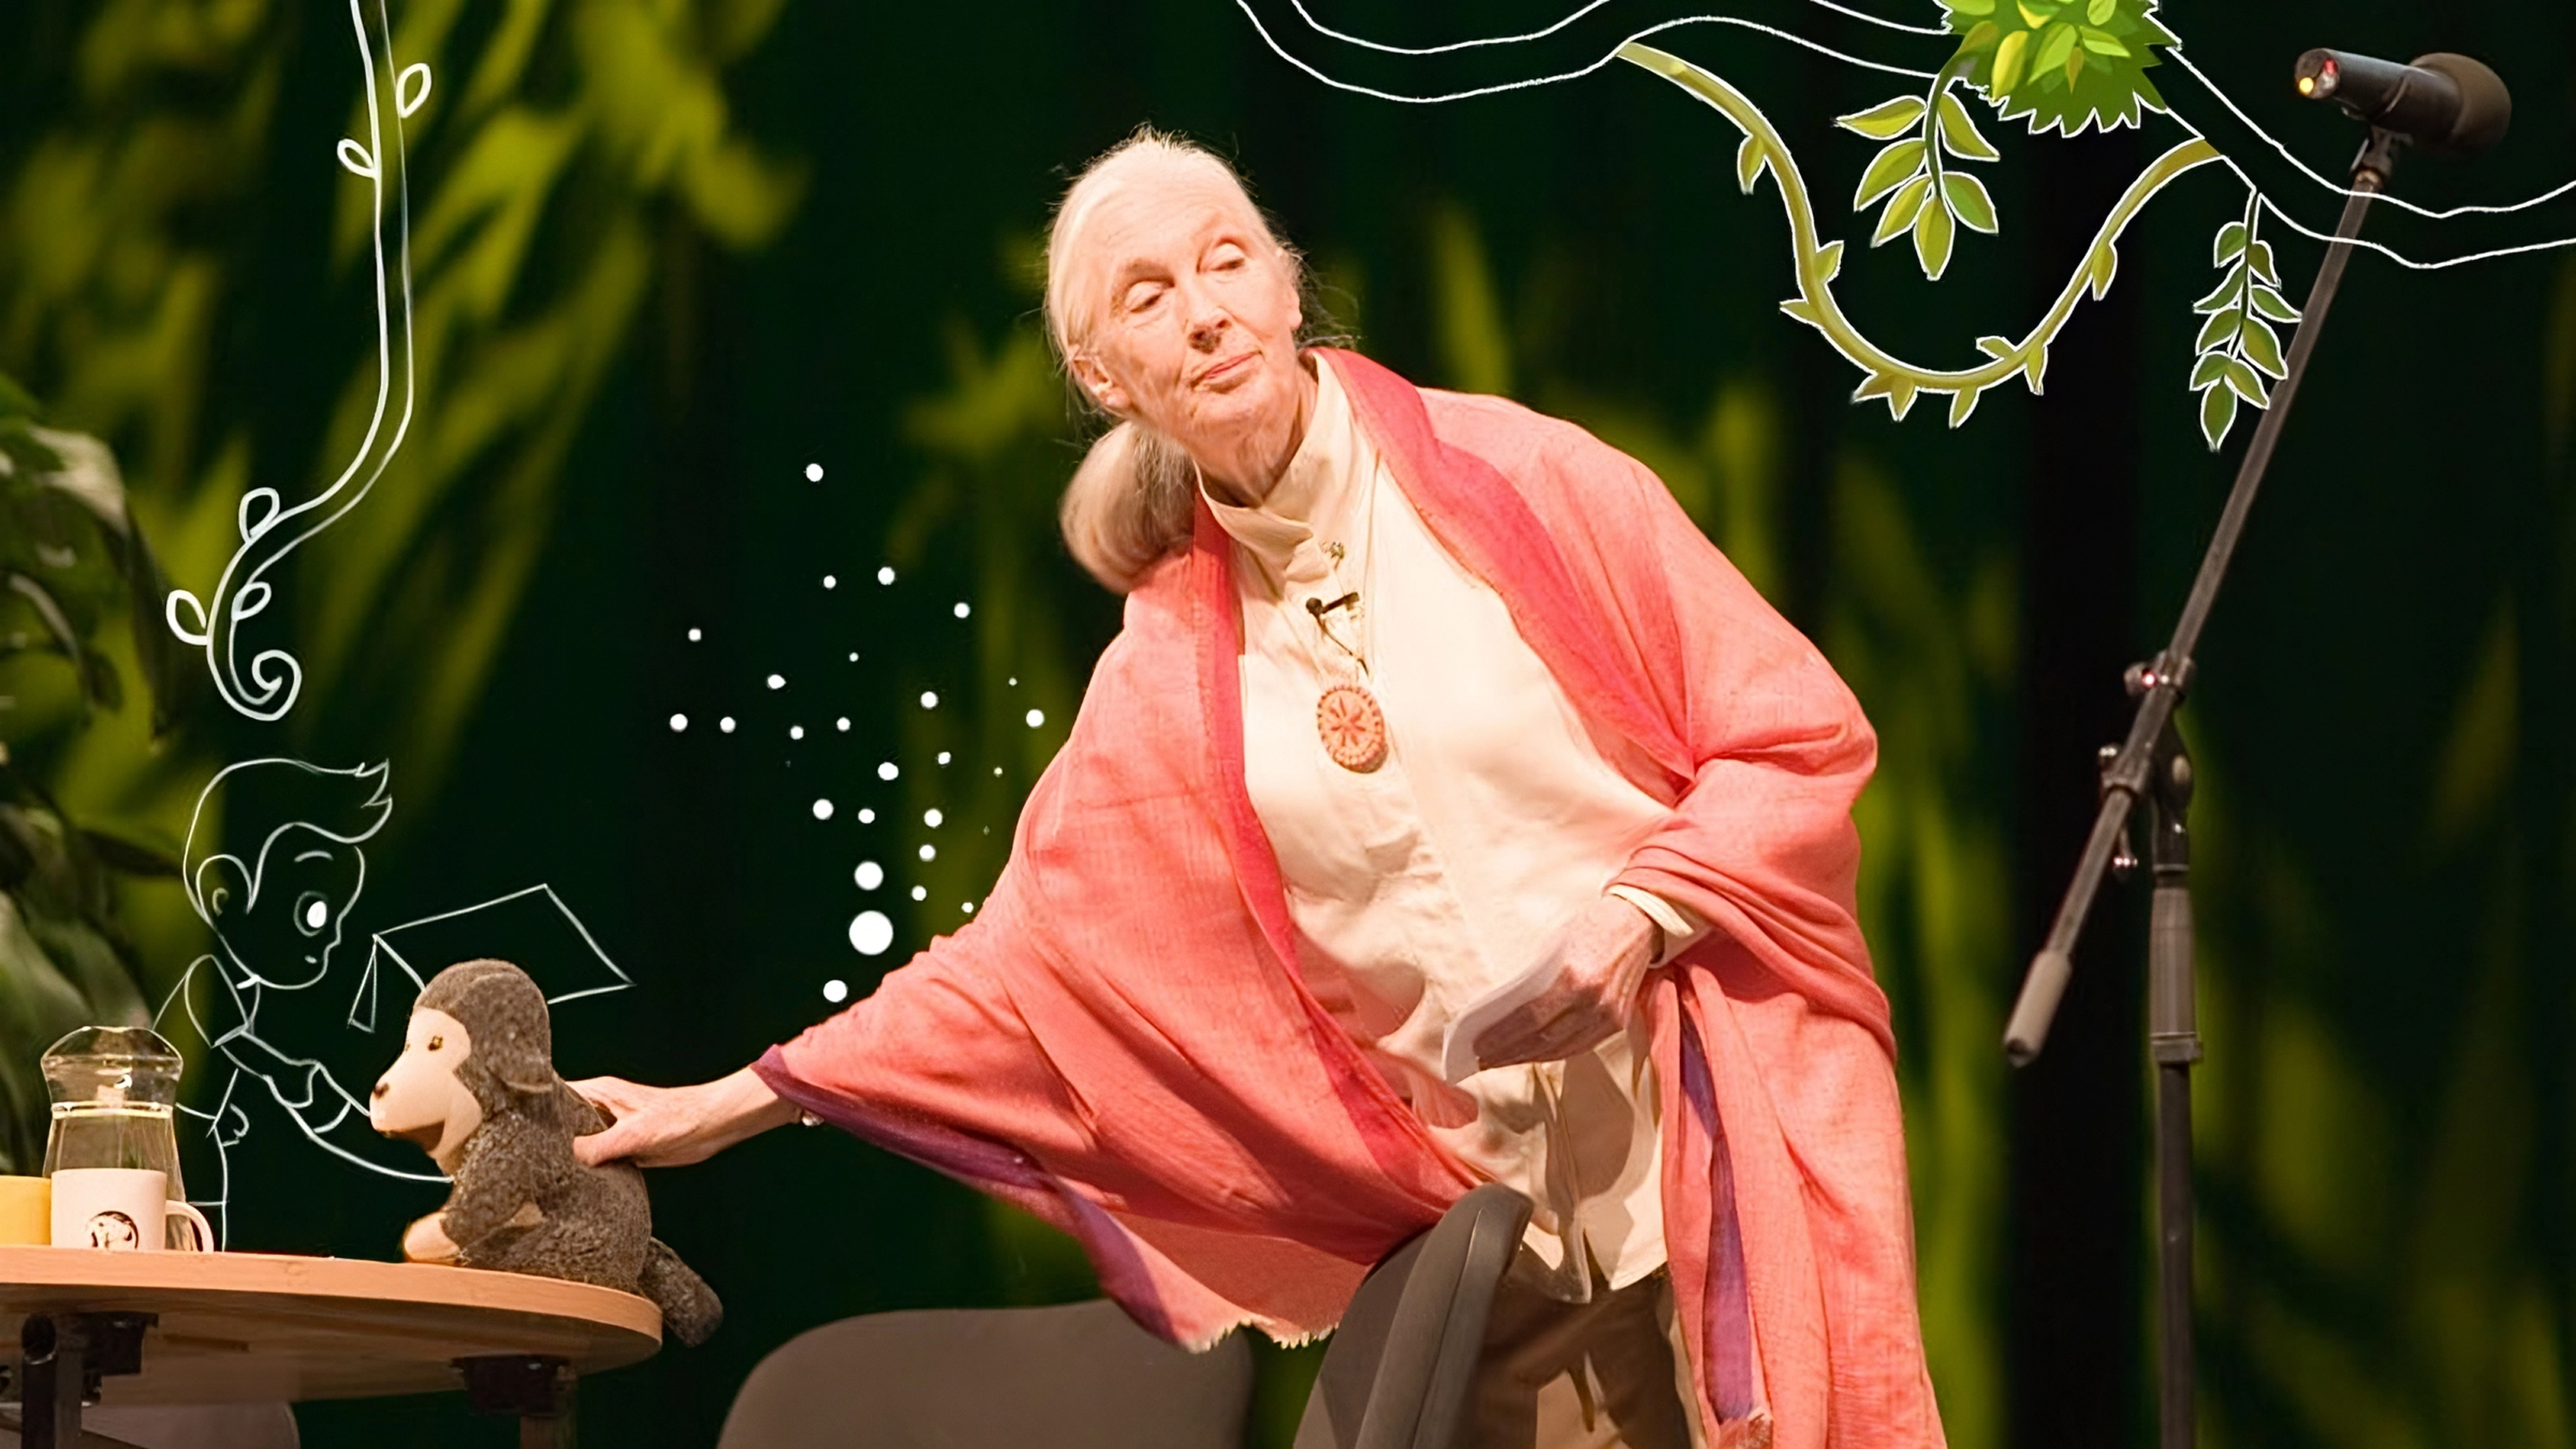 A case study brief about the design support provided for Jane Goodall Institue’s Indian initiative.